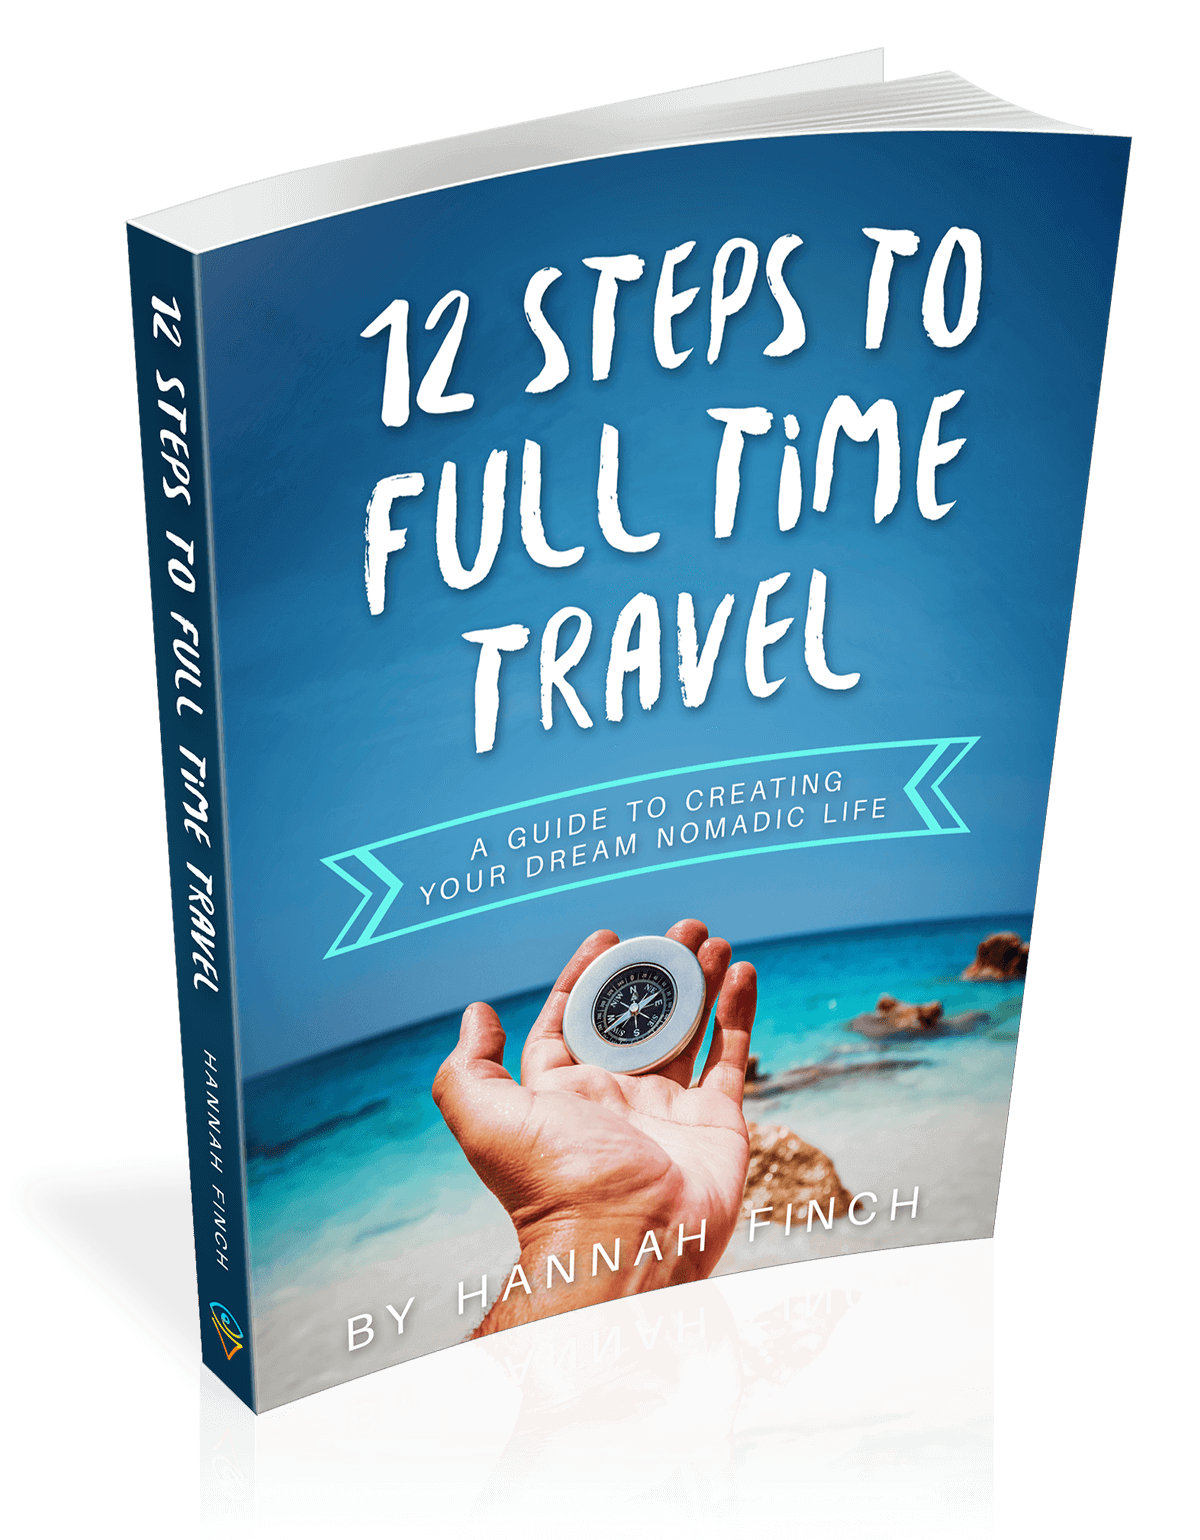 Want to turn travel into a lifestyle? Download our free eBook - 12 Steps To Full Time Travel